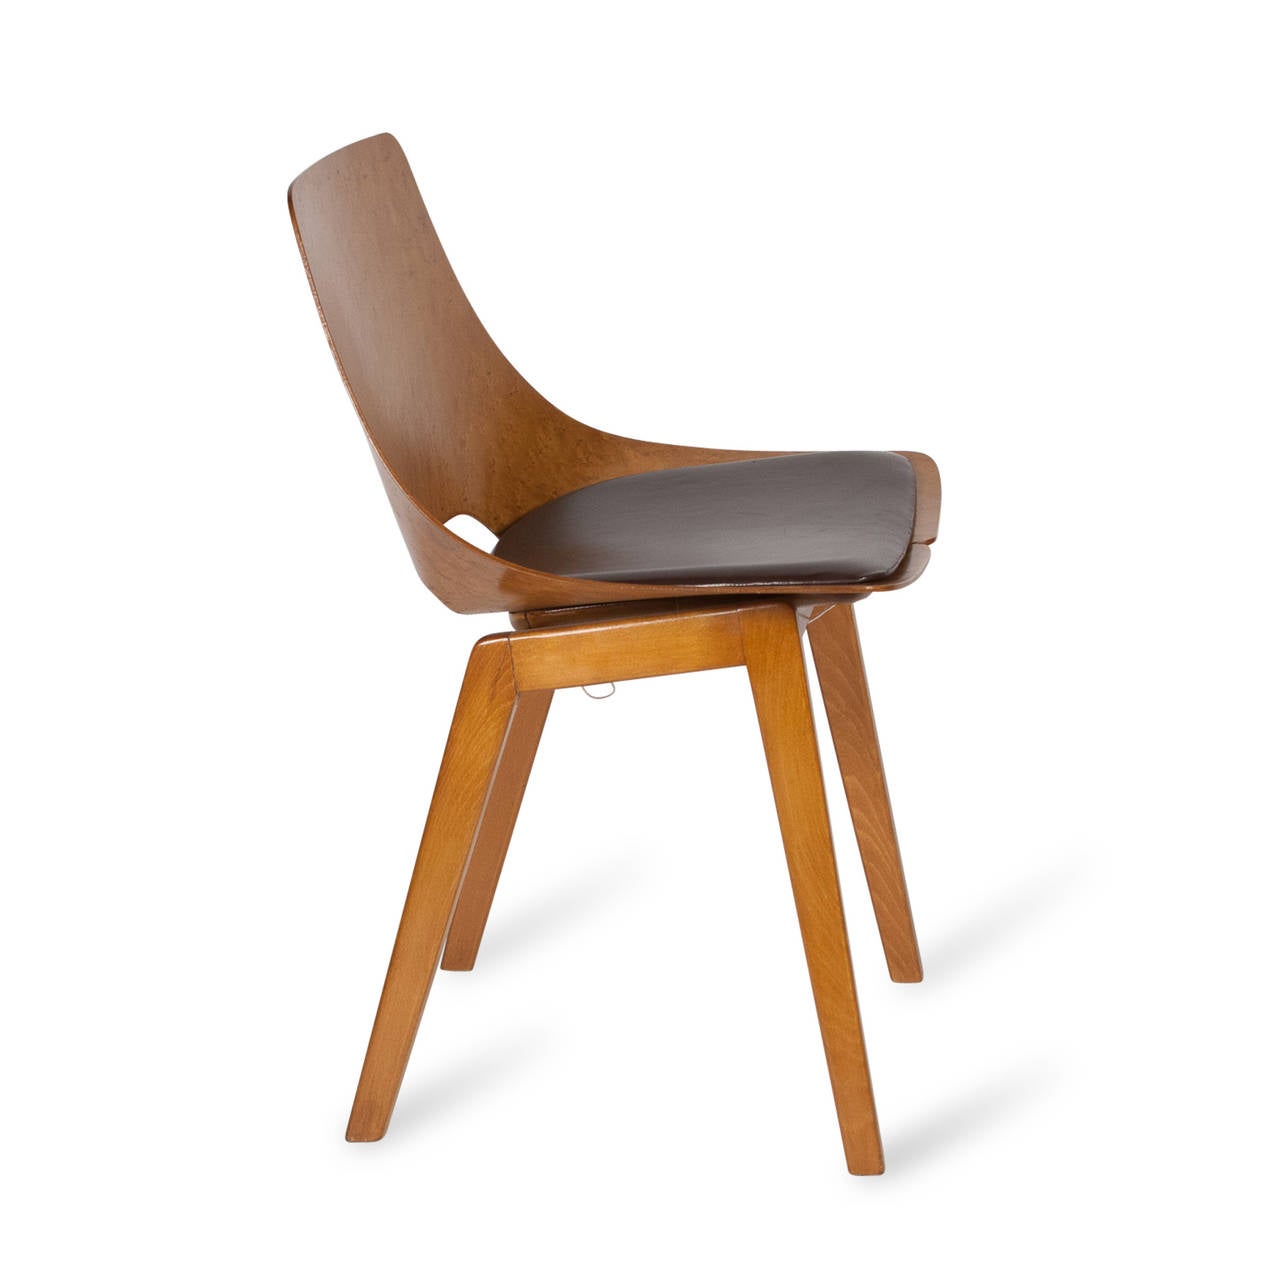 Mid-20th Century Original Molded Wood Chair by Pierre Guariche, French, 1950